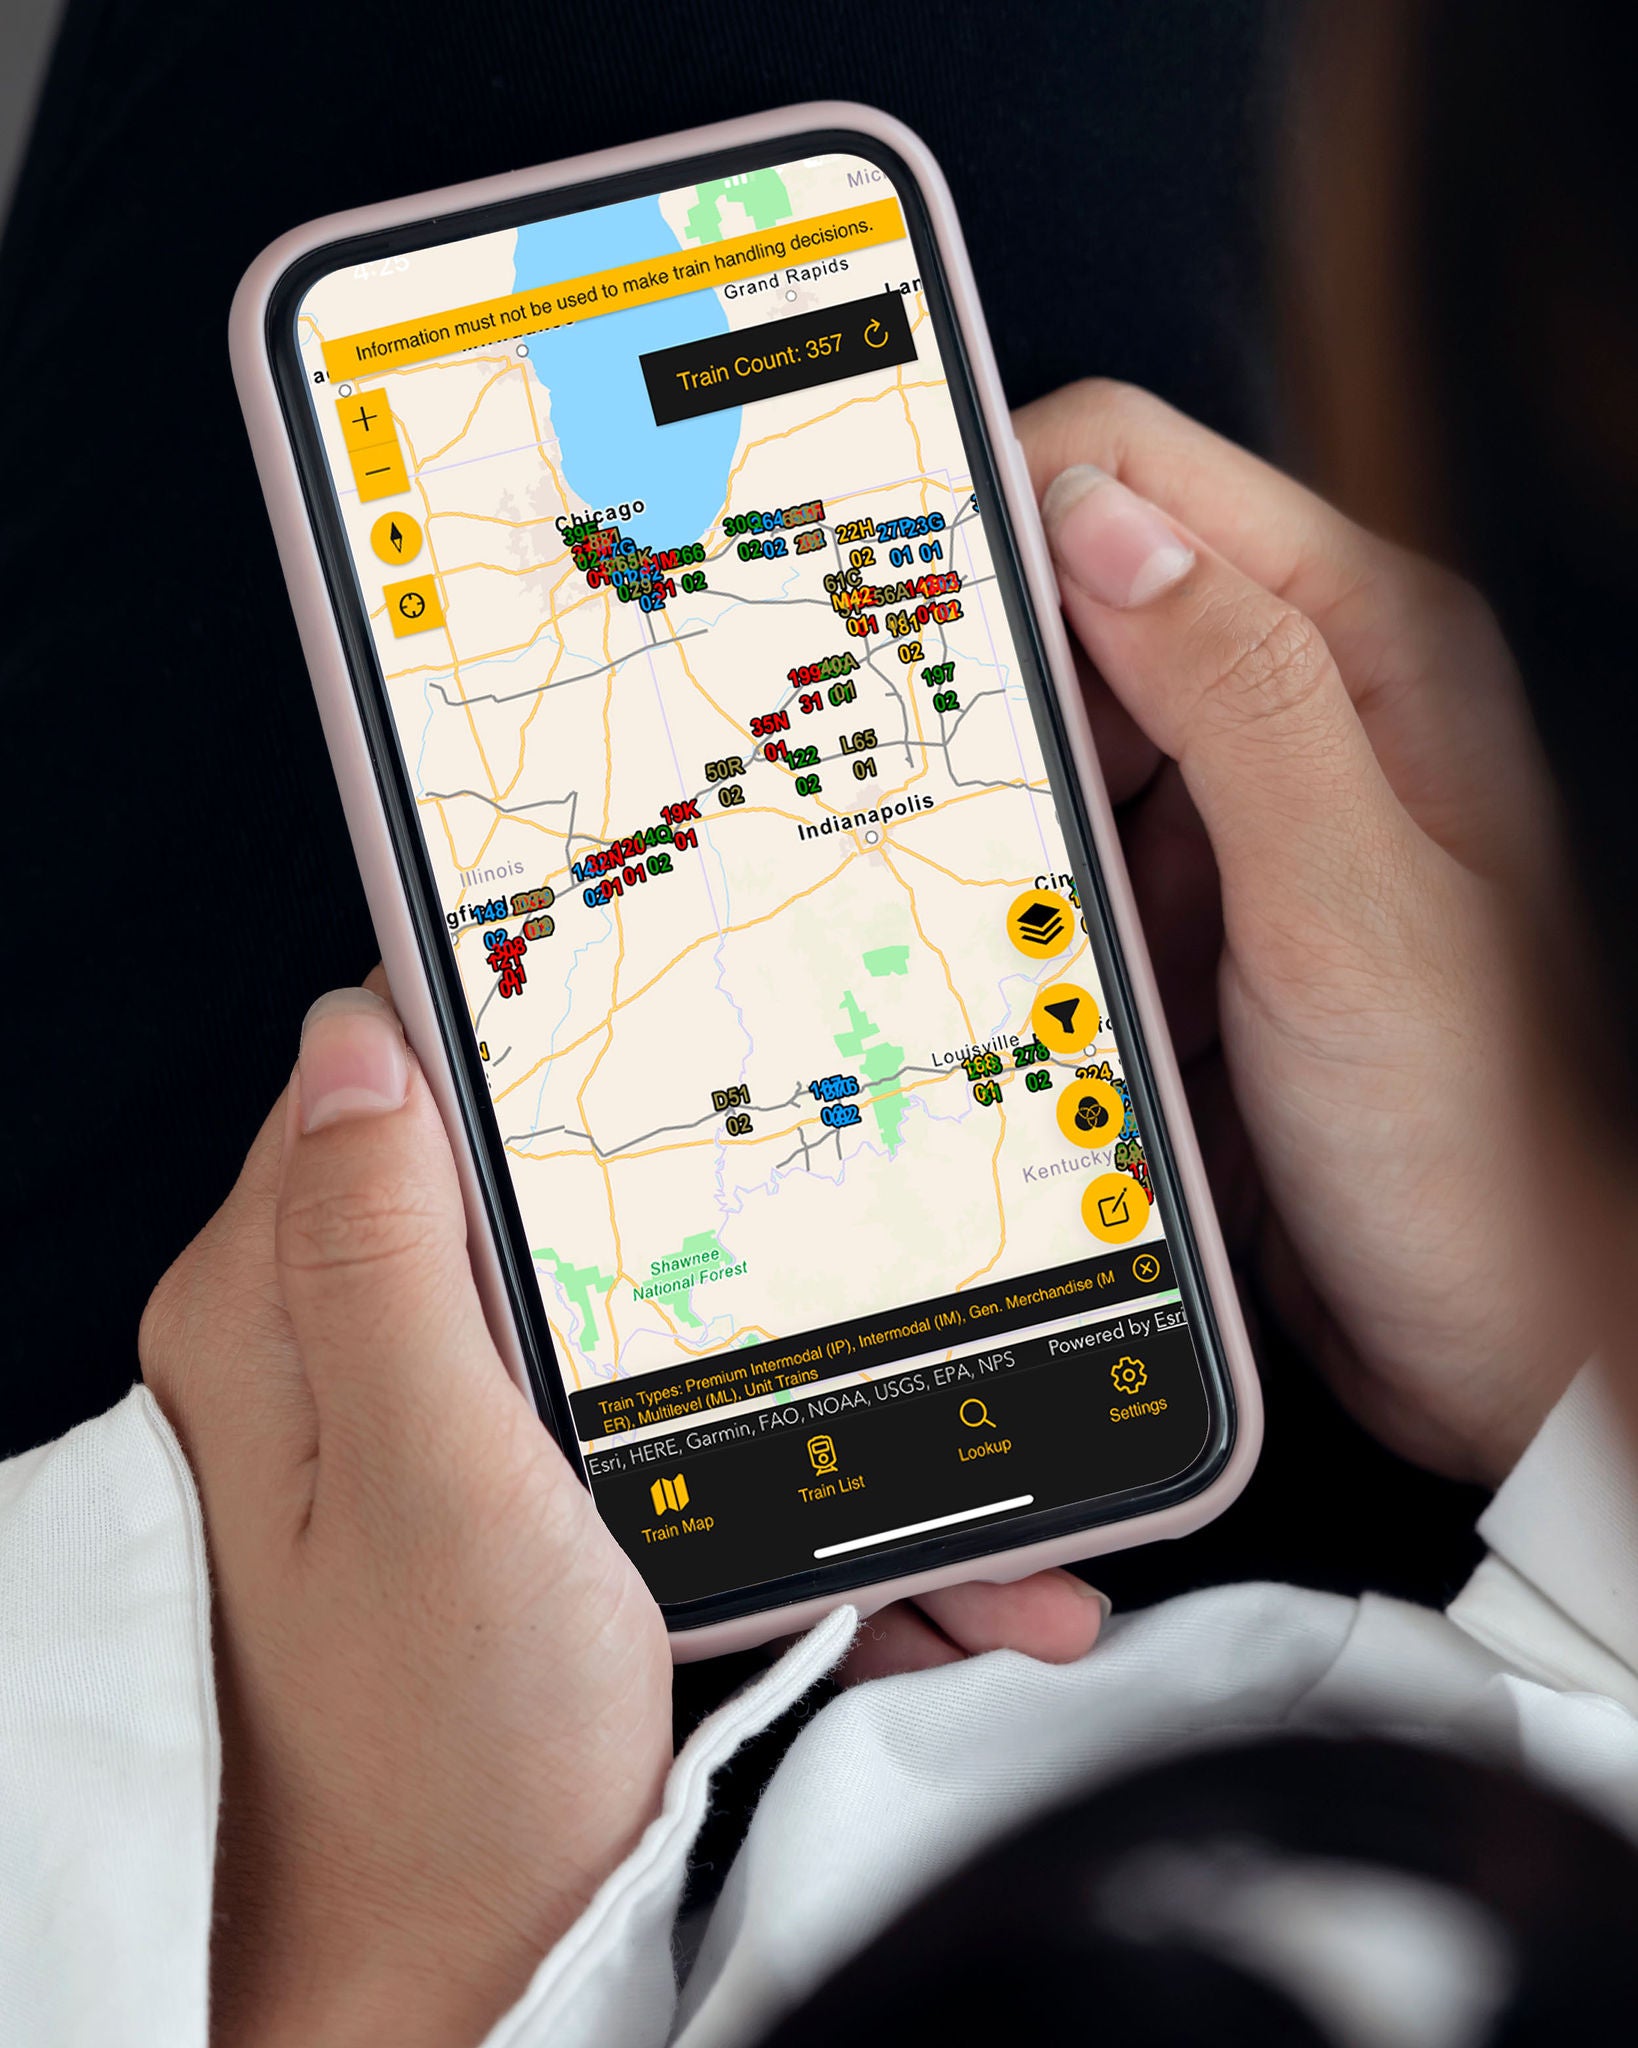 The hands of a Norfolk Southern employee hold a cellphone with a screen that depicts a tracking map that helps assist the company in their infrastructure technology efforts. 